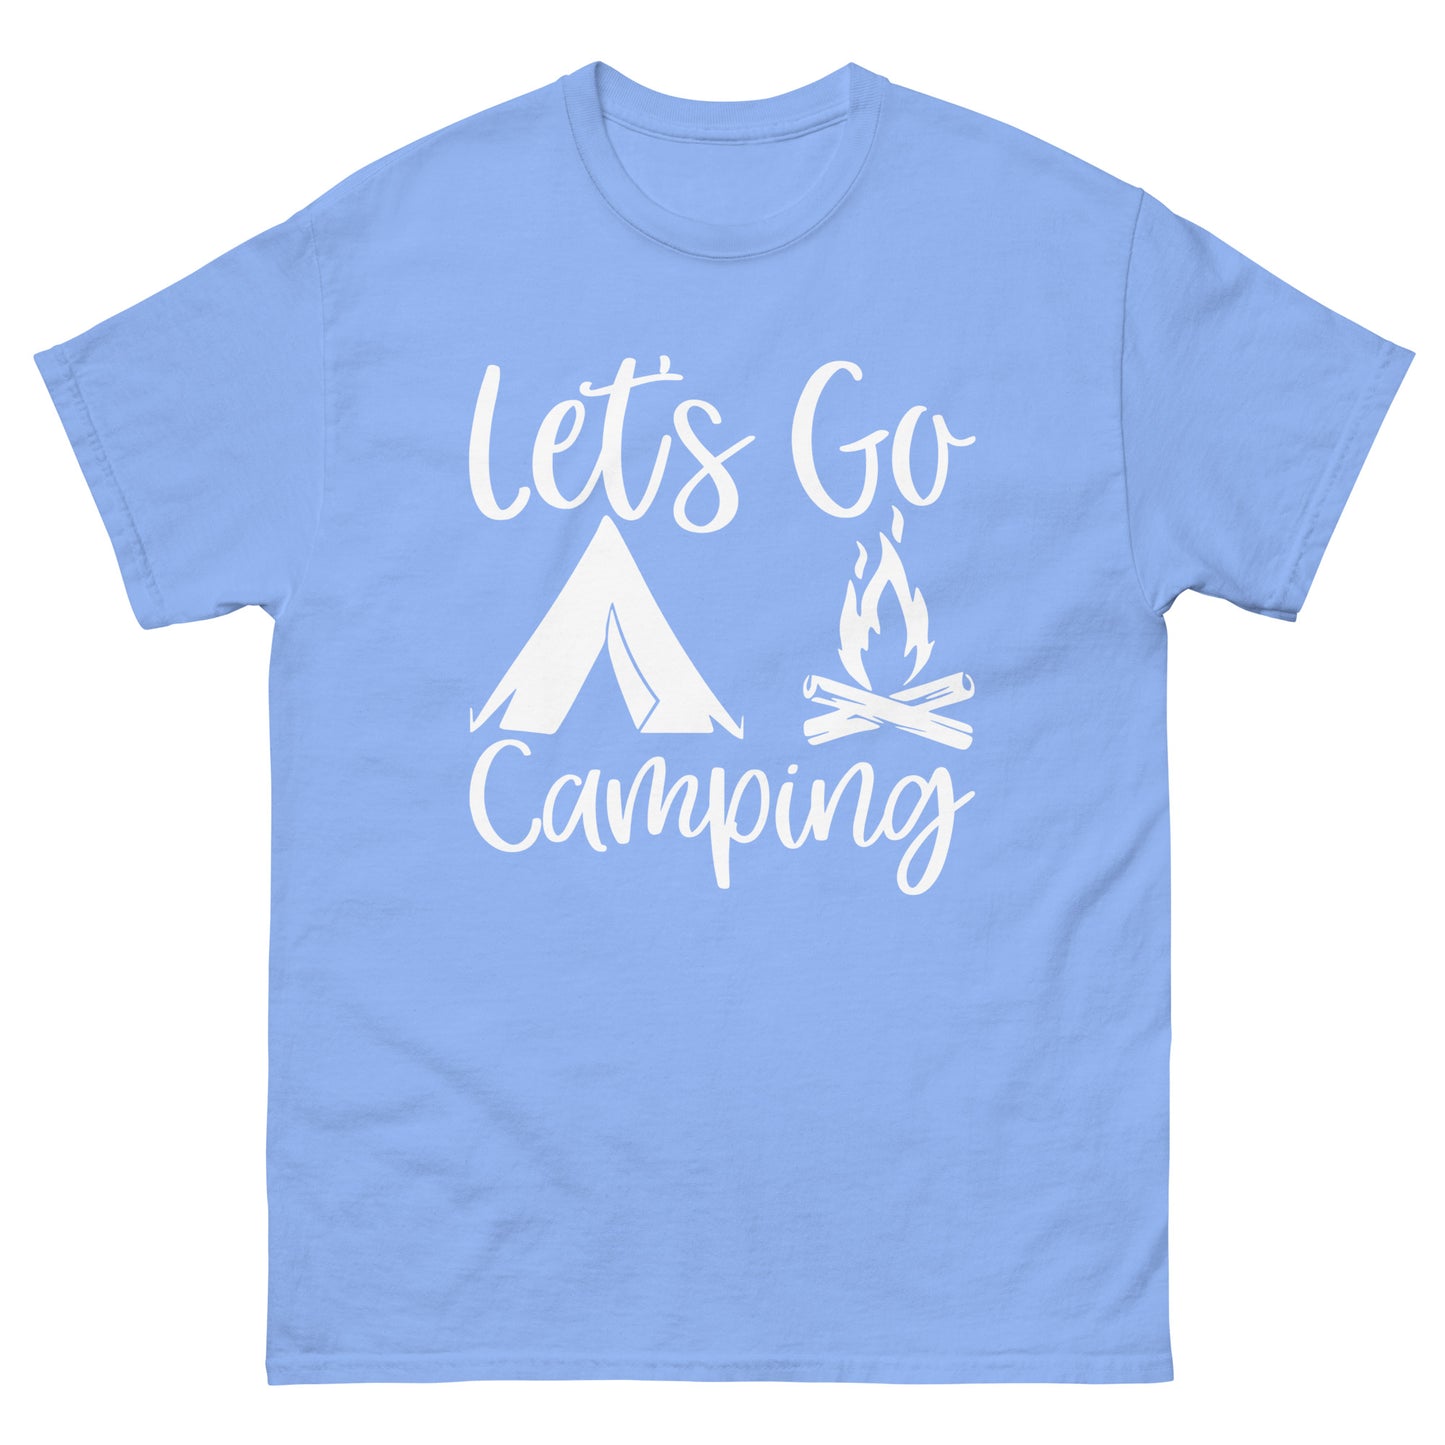 Lets go camping classic tee